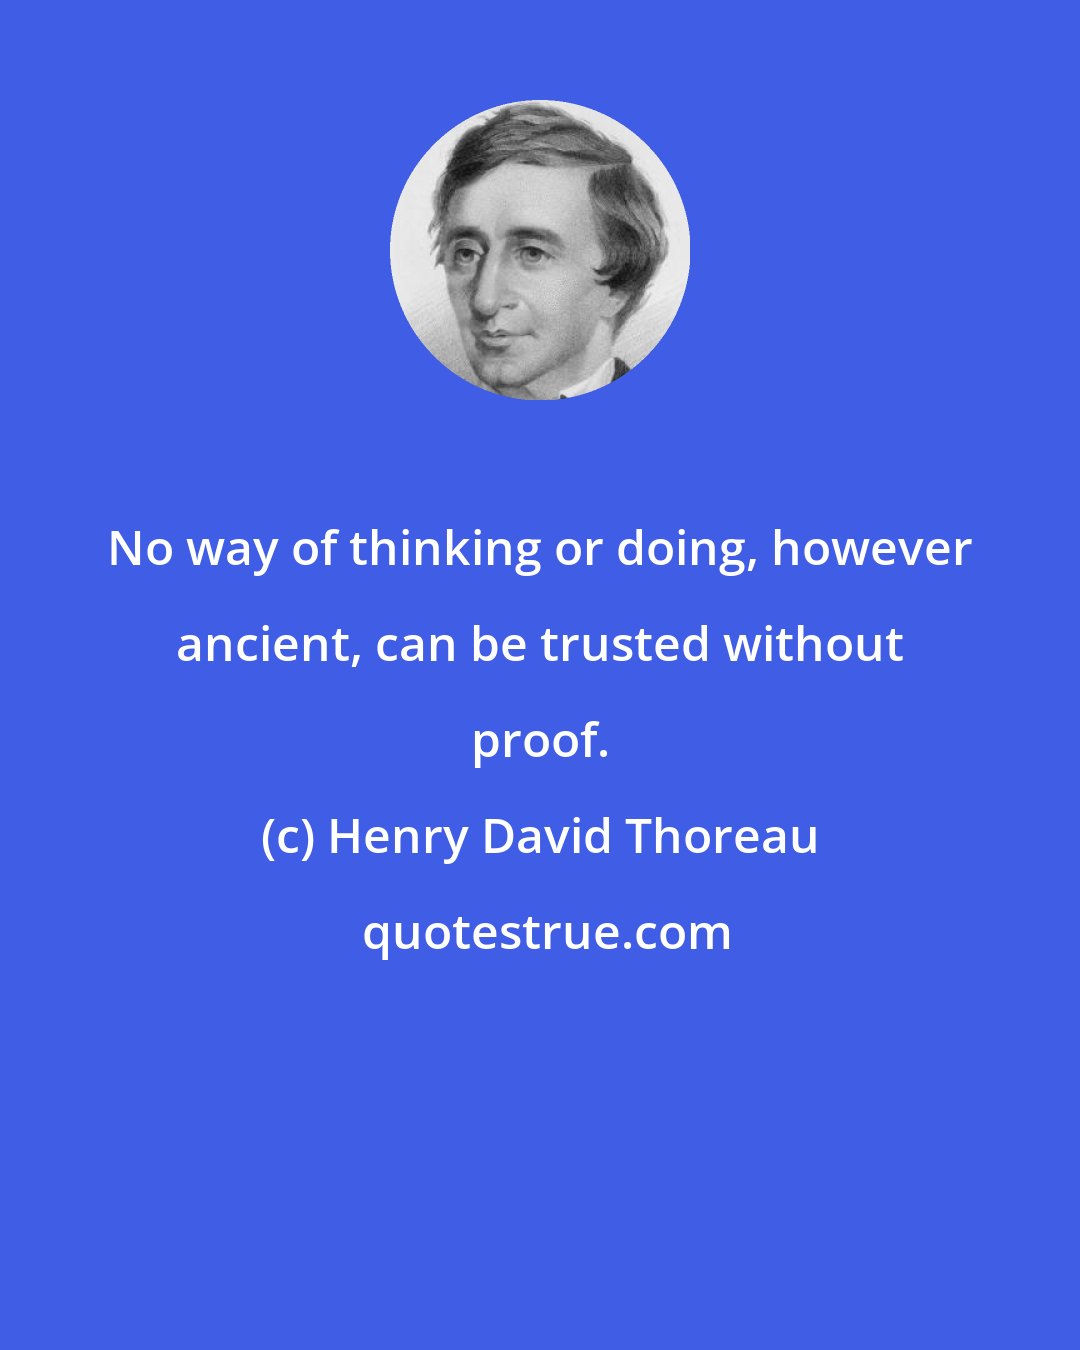 Henry David Thoreau: No way of thinking or doing, however ancient, can be trusted without proof.